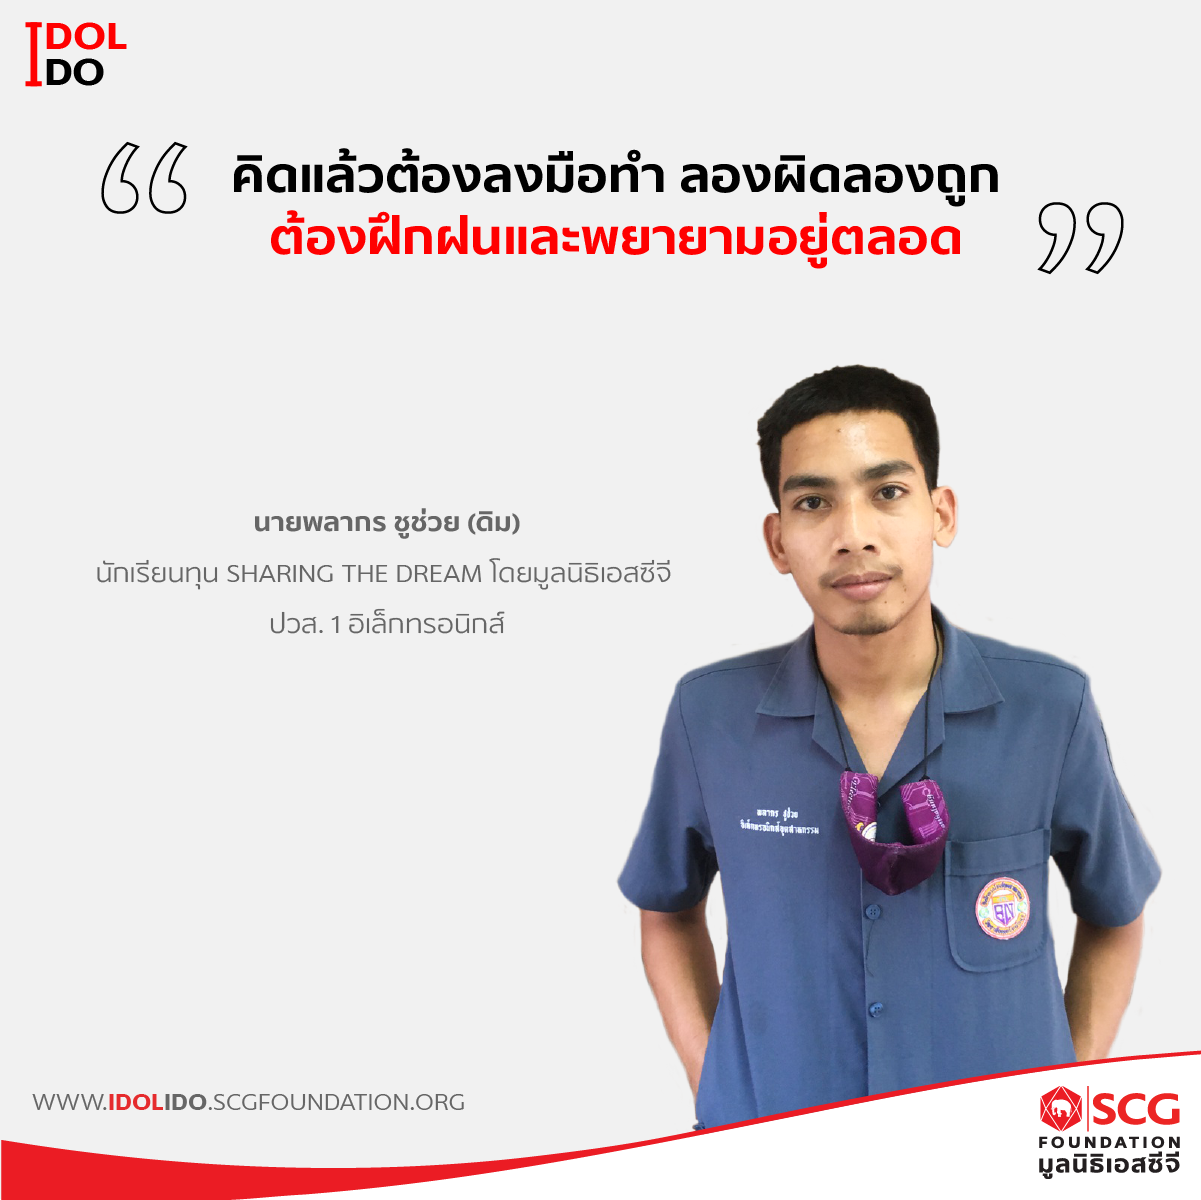 AW_Website_SCGF_Page_Goal_on_ดิม-01